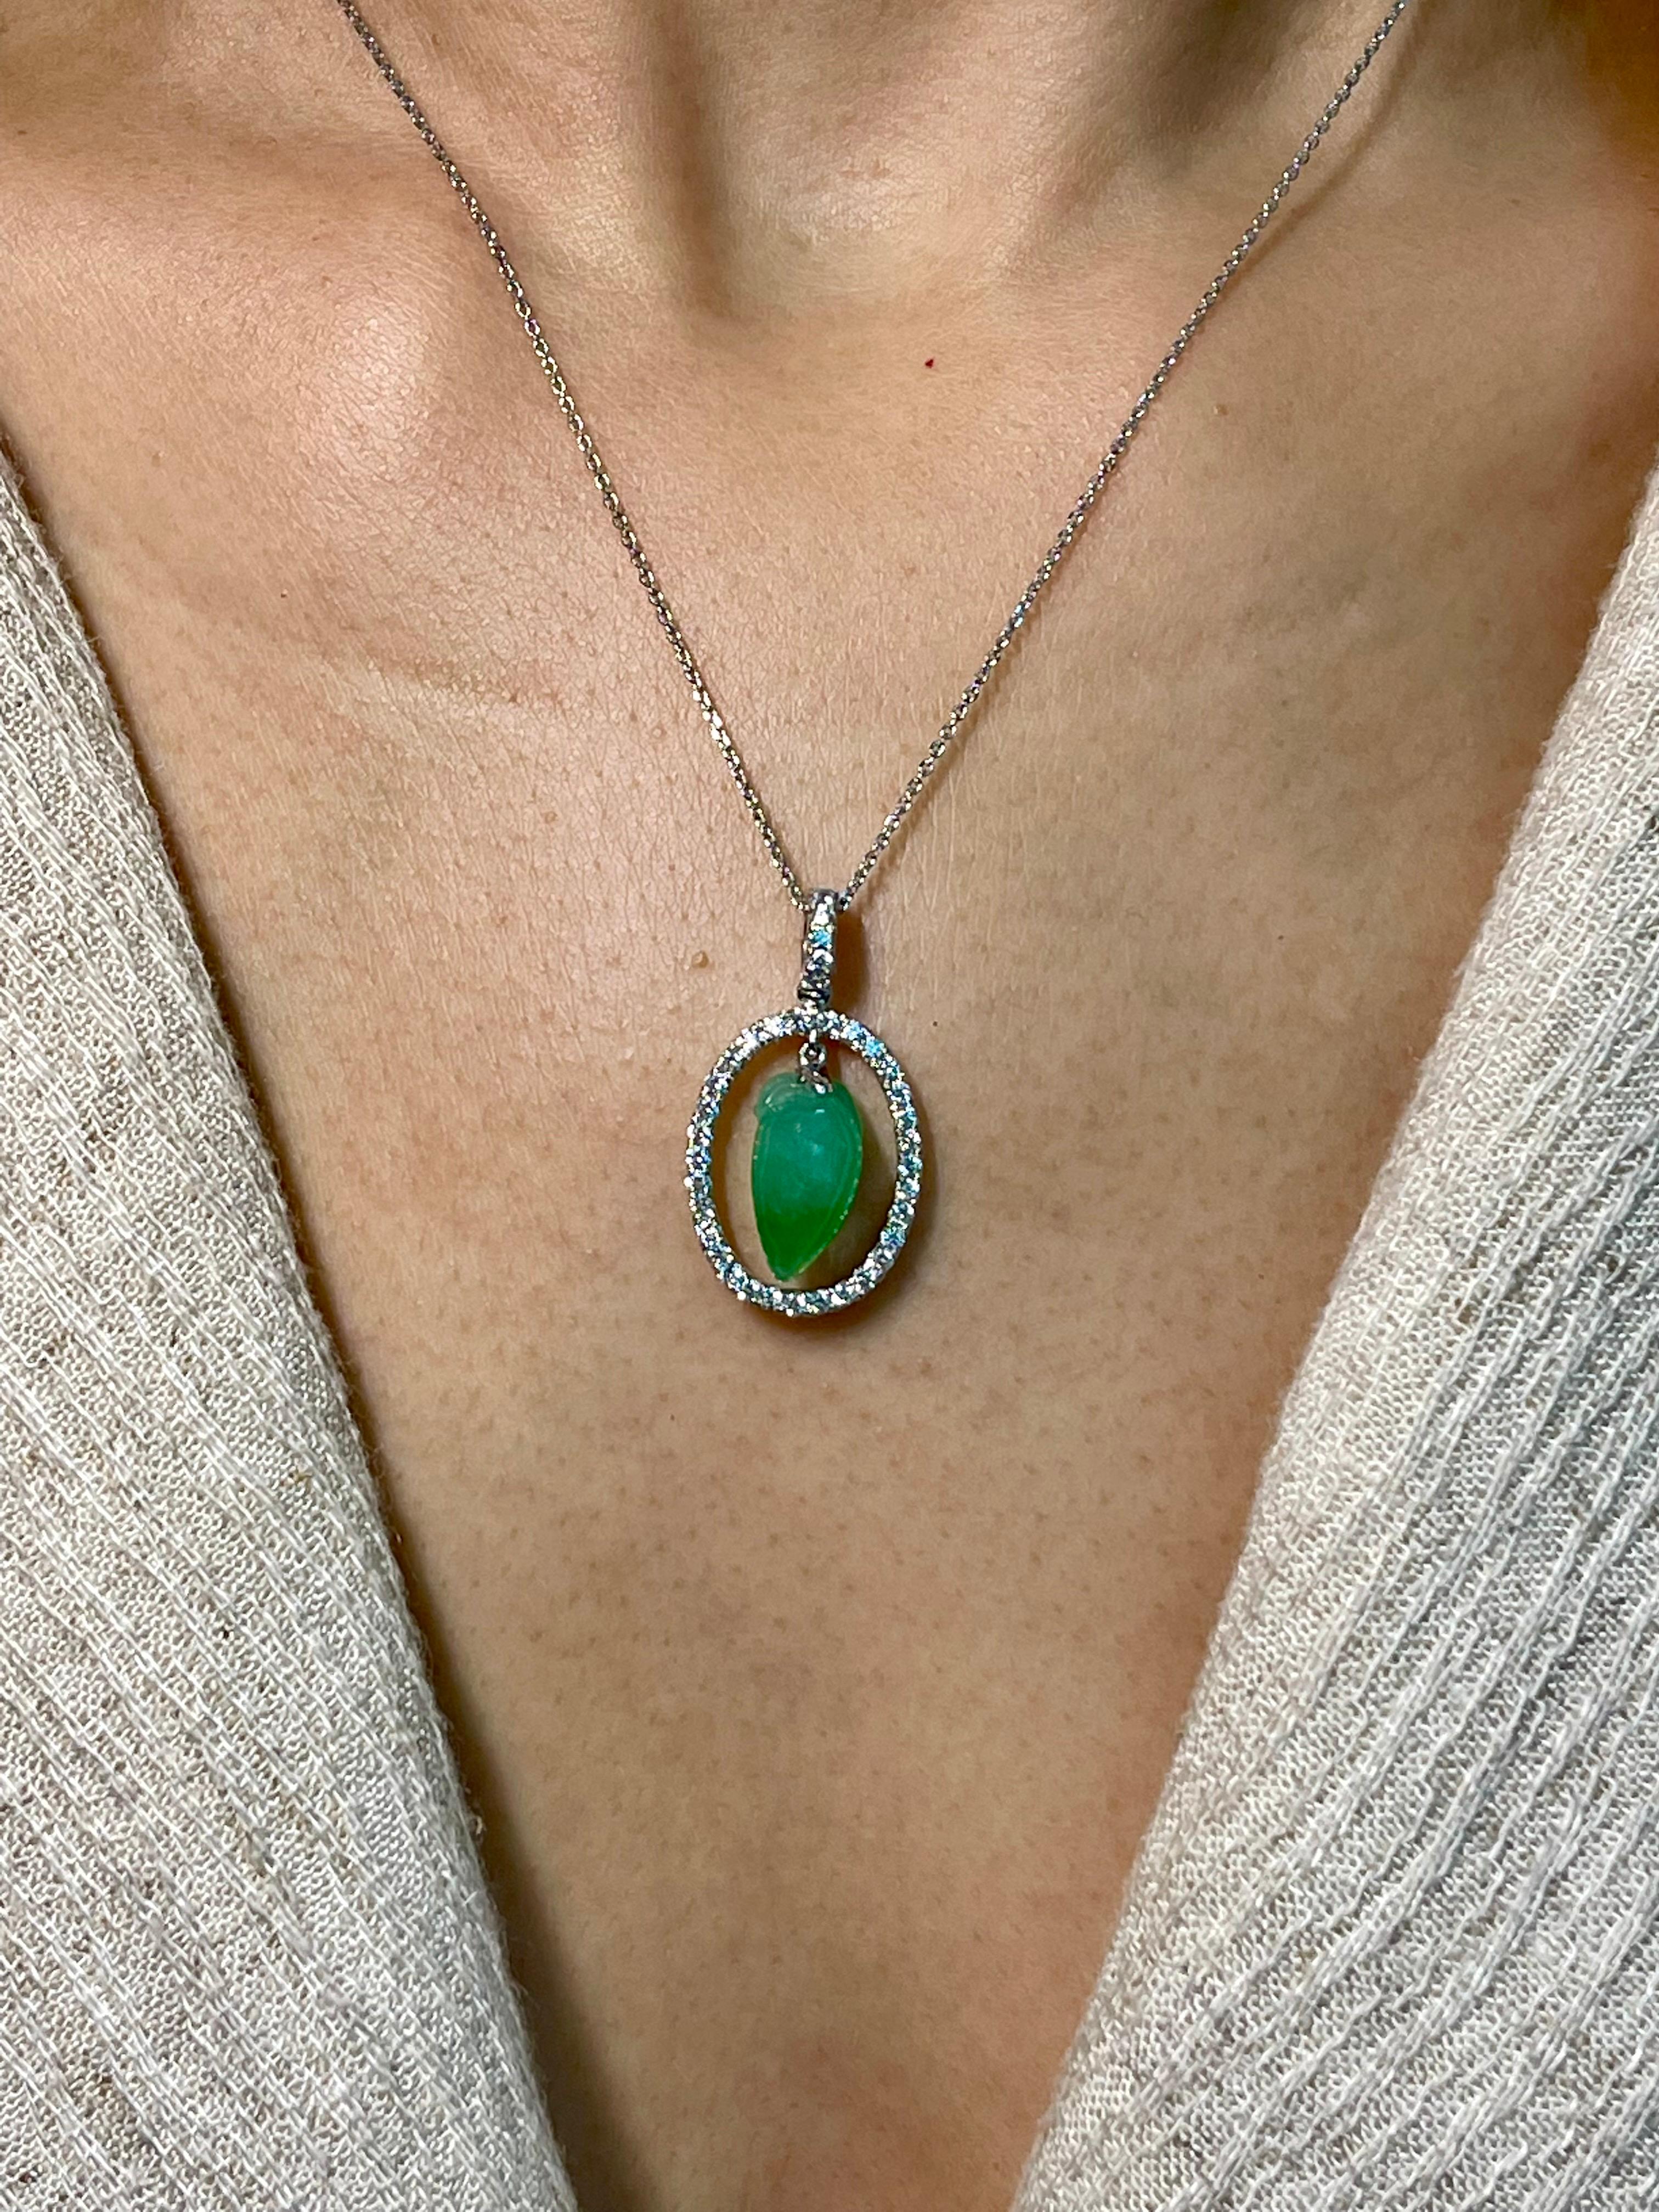 This jade has a beautiful balance of color saturation and transparency! Here is a natural apple green Jade and diamond pendant. It is certified. The pendant is set in 18k white gold and diamonds. There are 0.42 cts of small round diamonds that